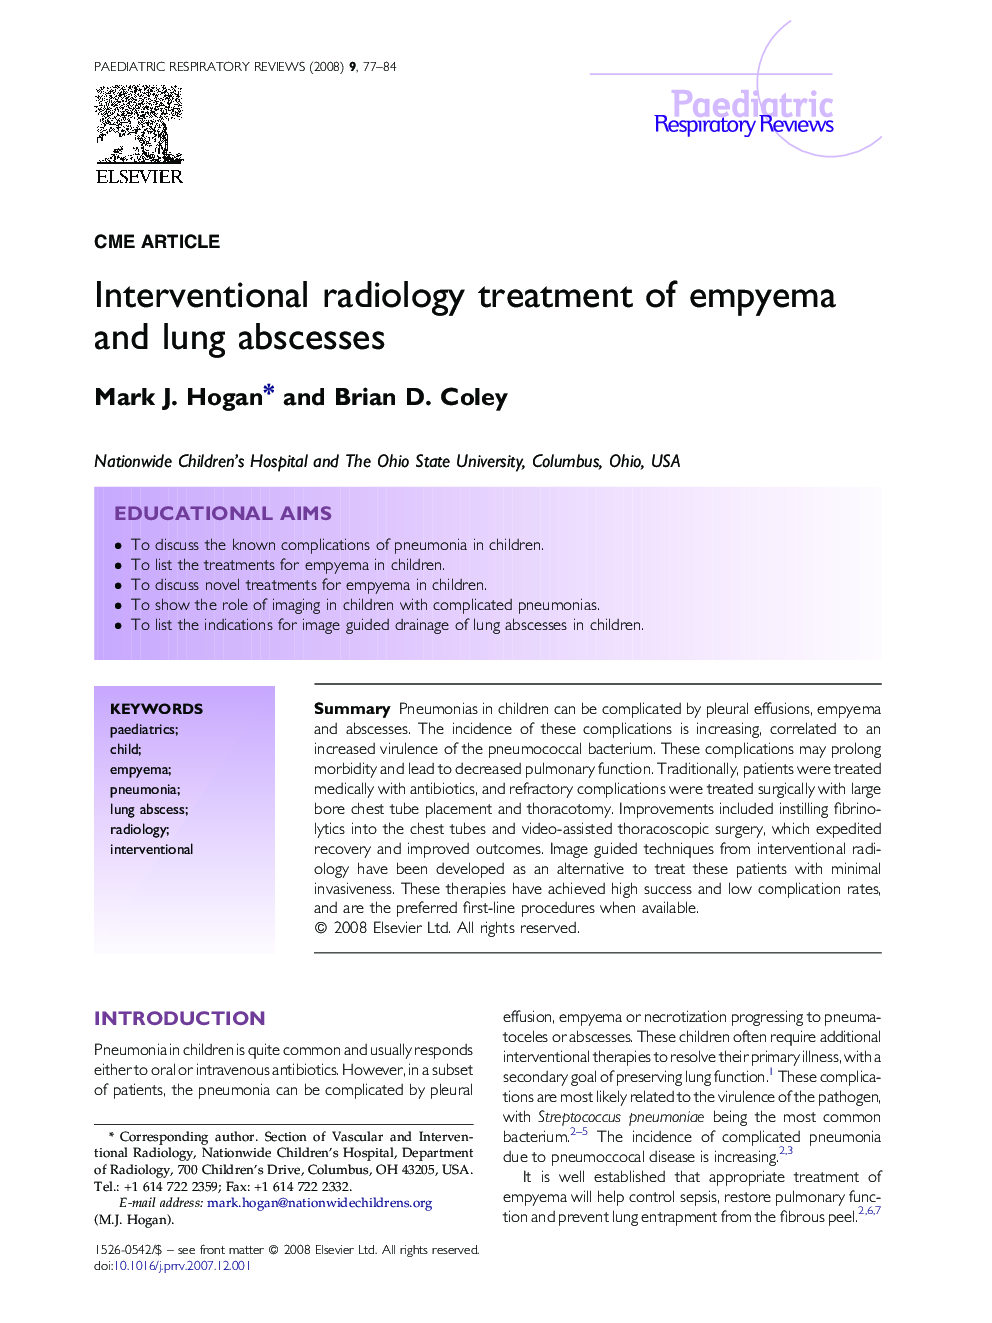 Interventional radiology treatment of empyema and lung abscesses